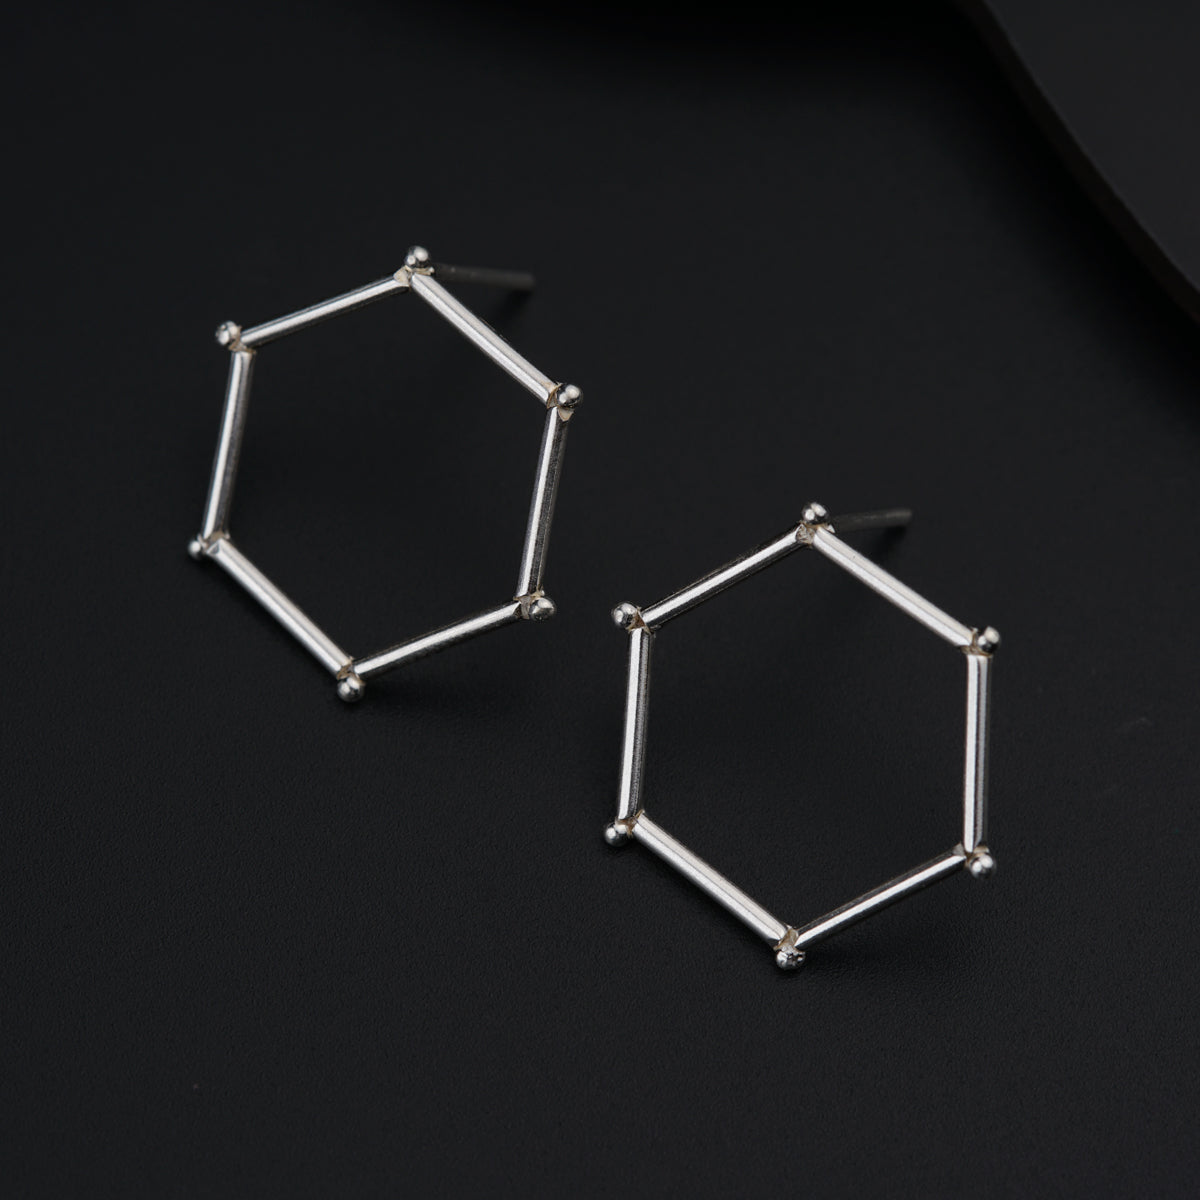 a pair of silver hexagonal earrings on a black surface